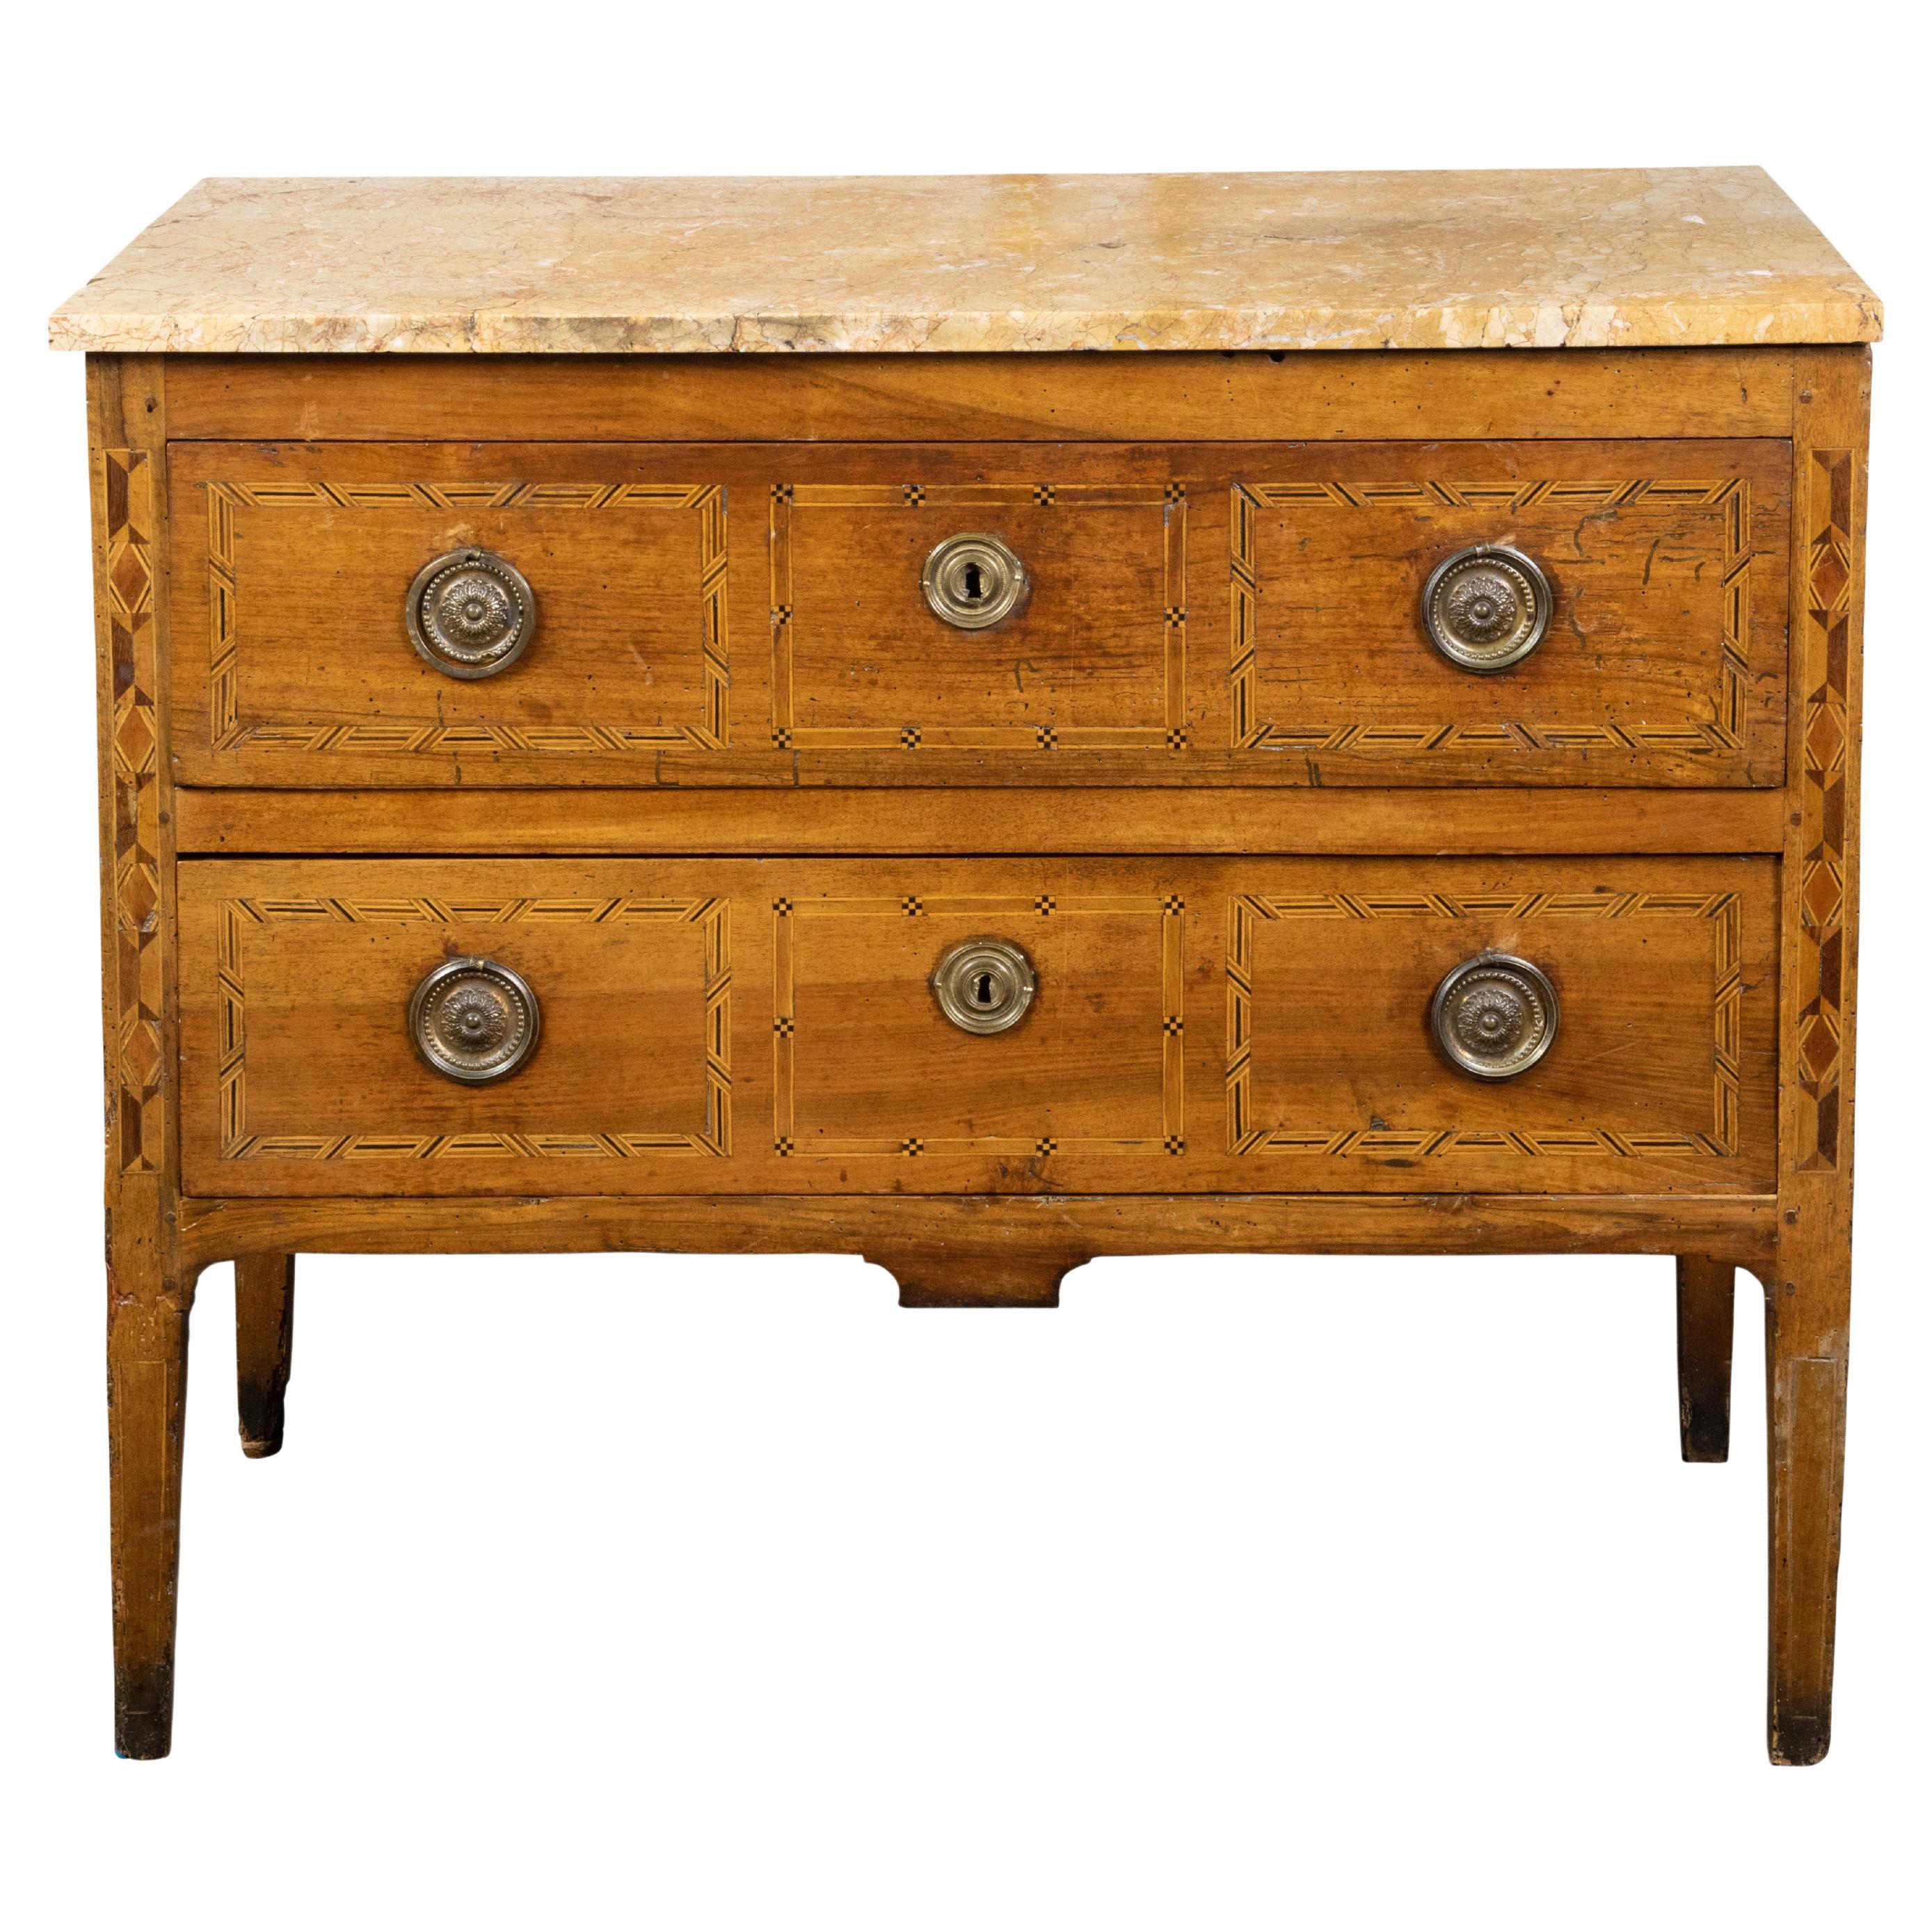 Italian 1800s Walnut Two-Drawer Commode with Marble Top and Geometric Inlay